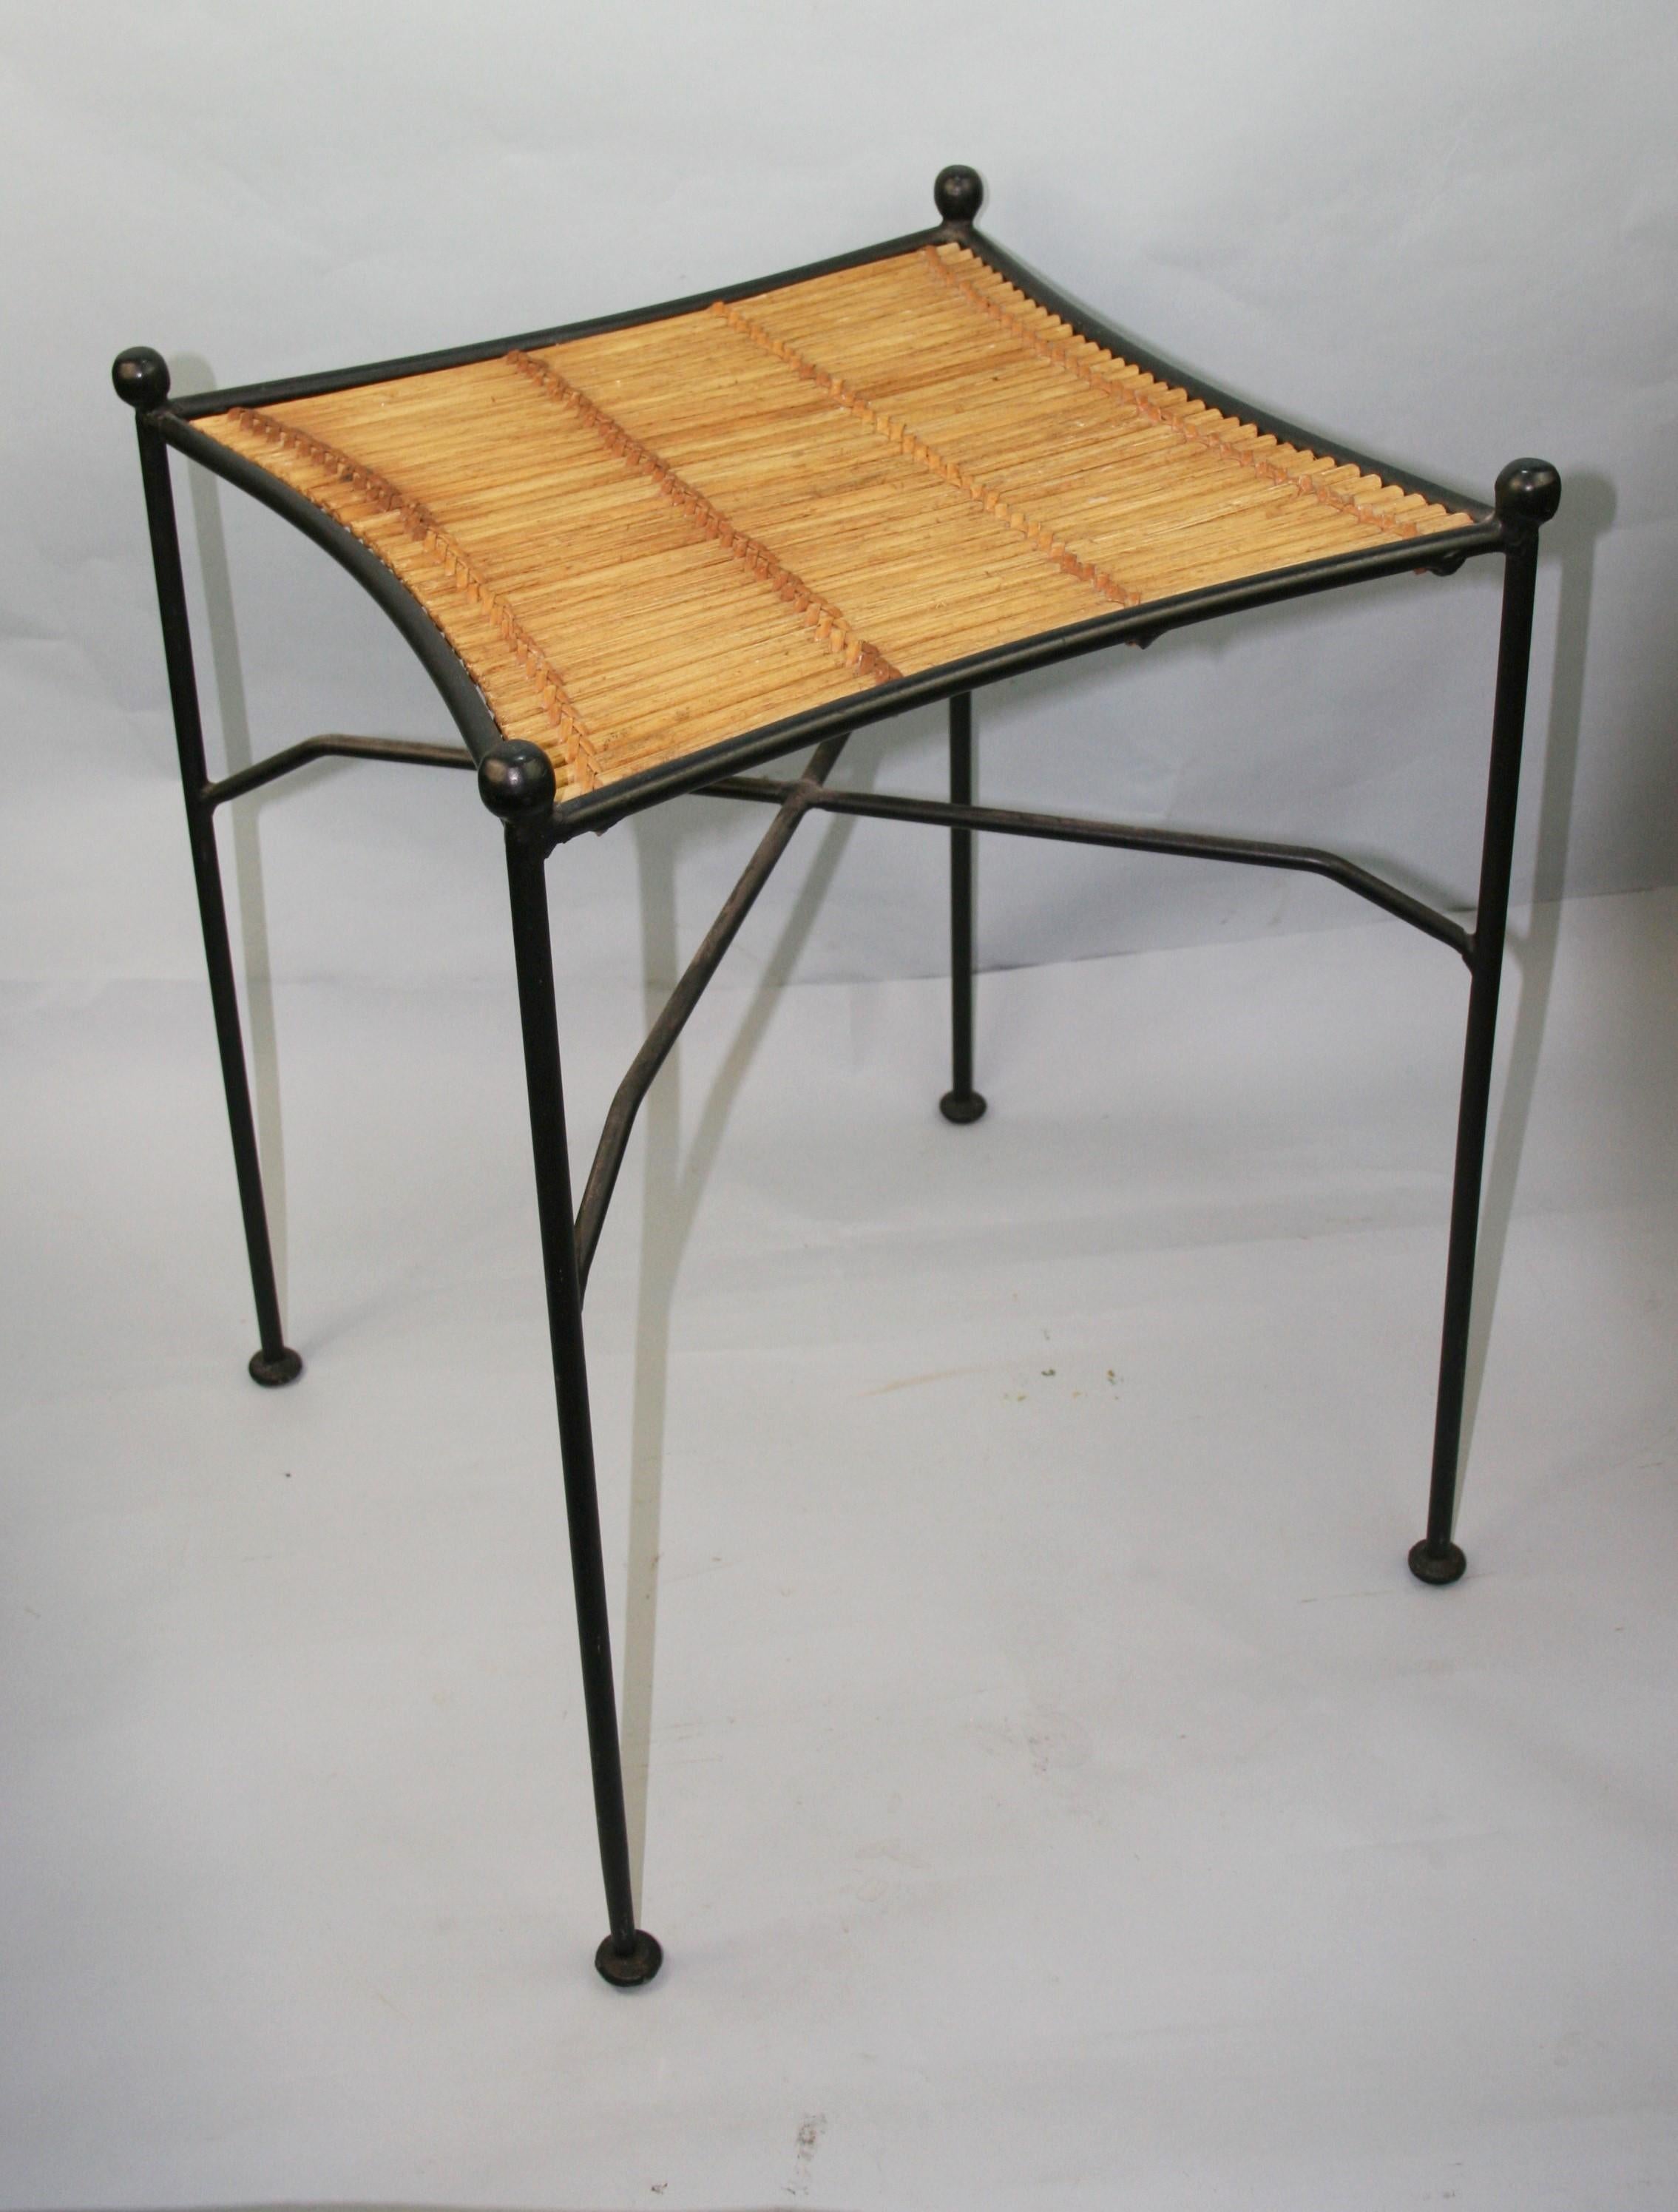 Italian hand made iron table with ball feet and woven willow top.